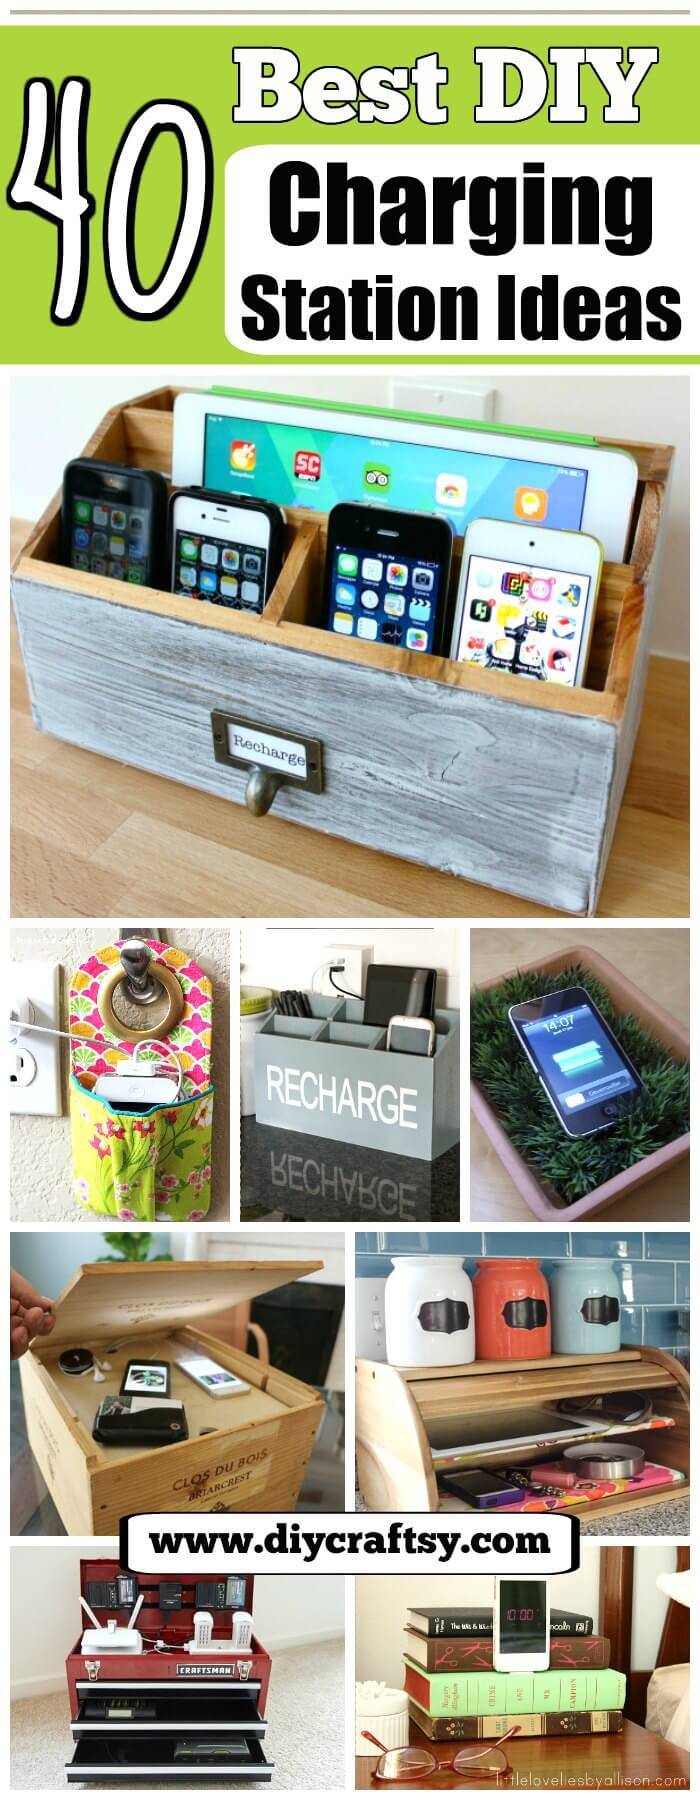 DIY Charging Station Ideas - easy DIY charging station project